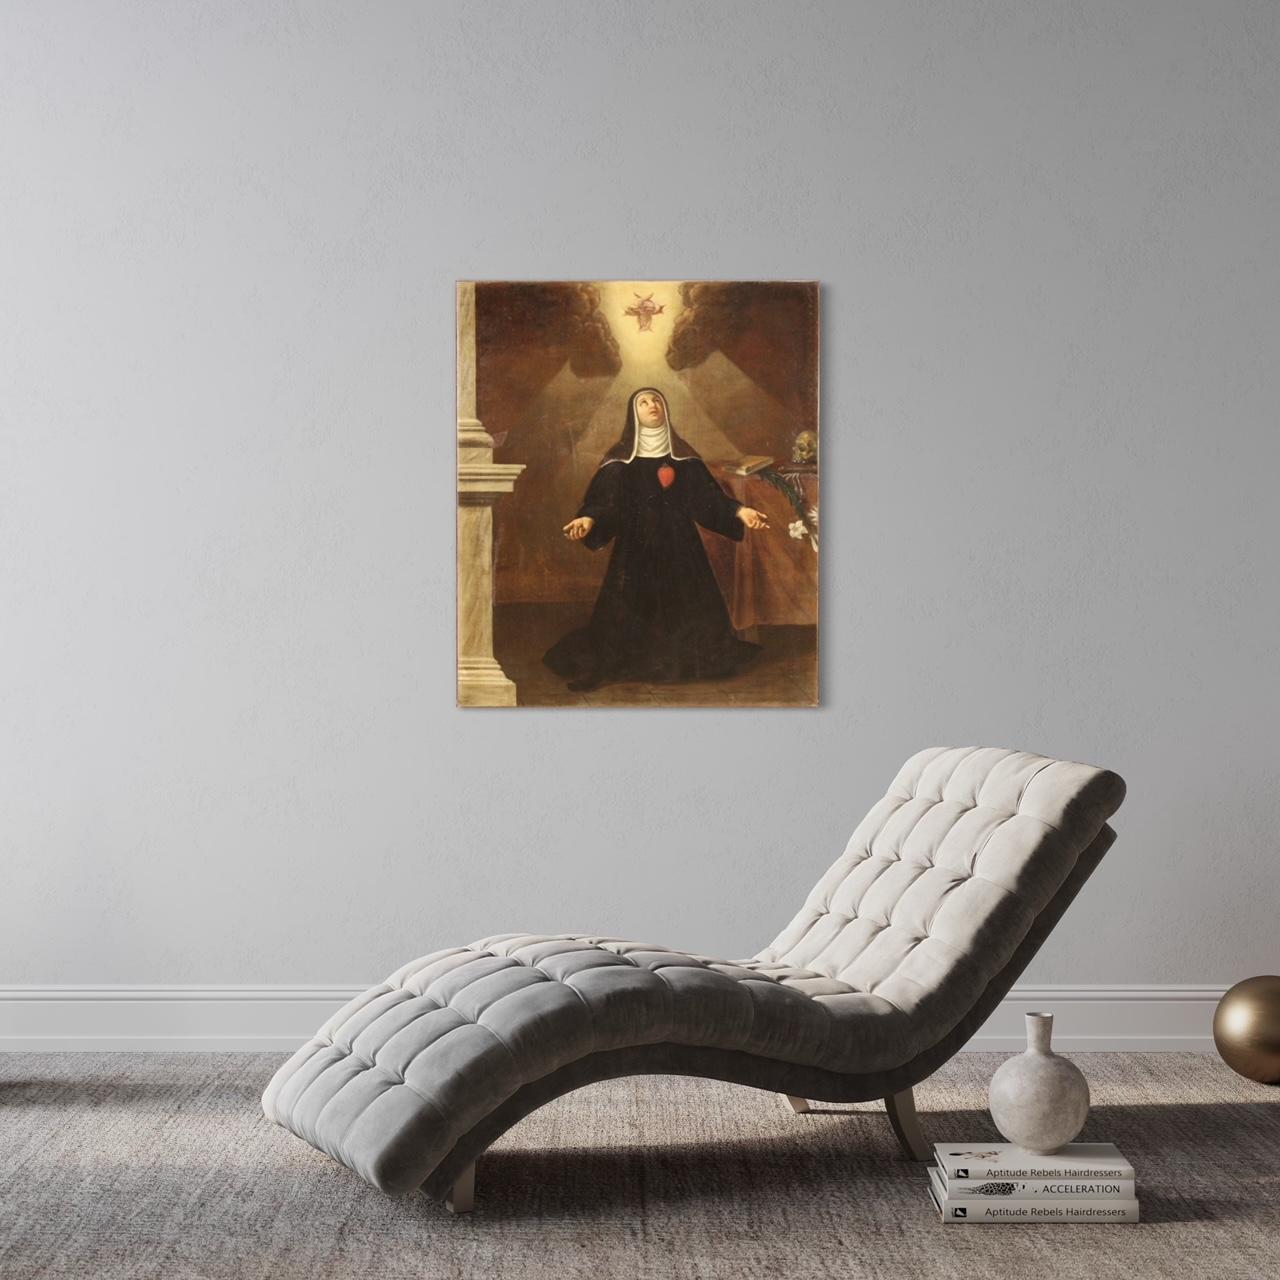 Ancient Italian painting from the 18th century. Framework oil on canvas depicting a religious subject Saint (under study) in ecstasy, with lily and skull, of good pictorial quality. Painting of great measure and impact, for antique dealers, interior